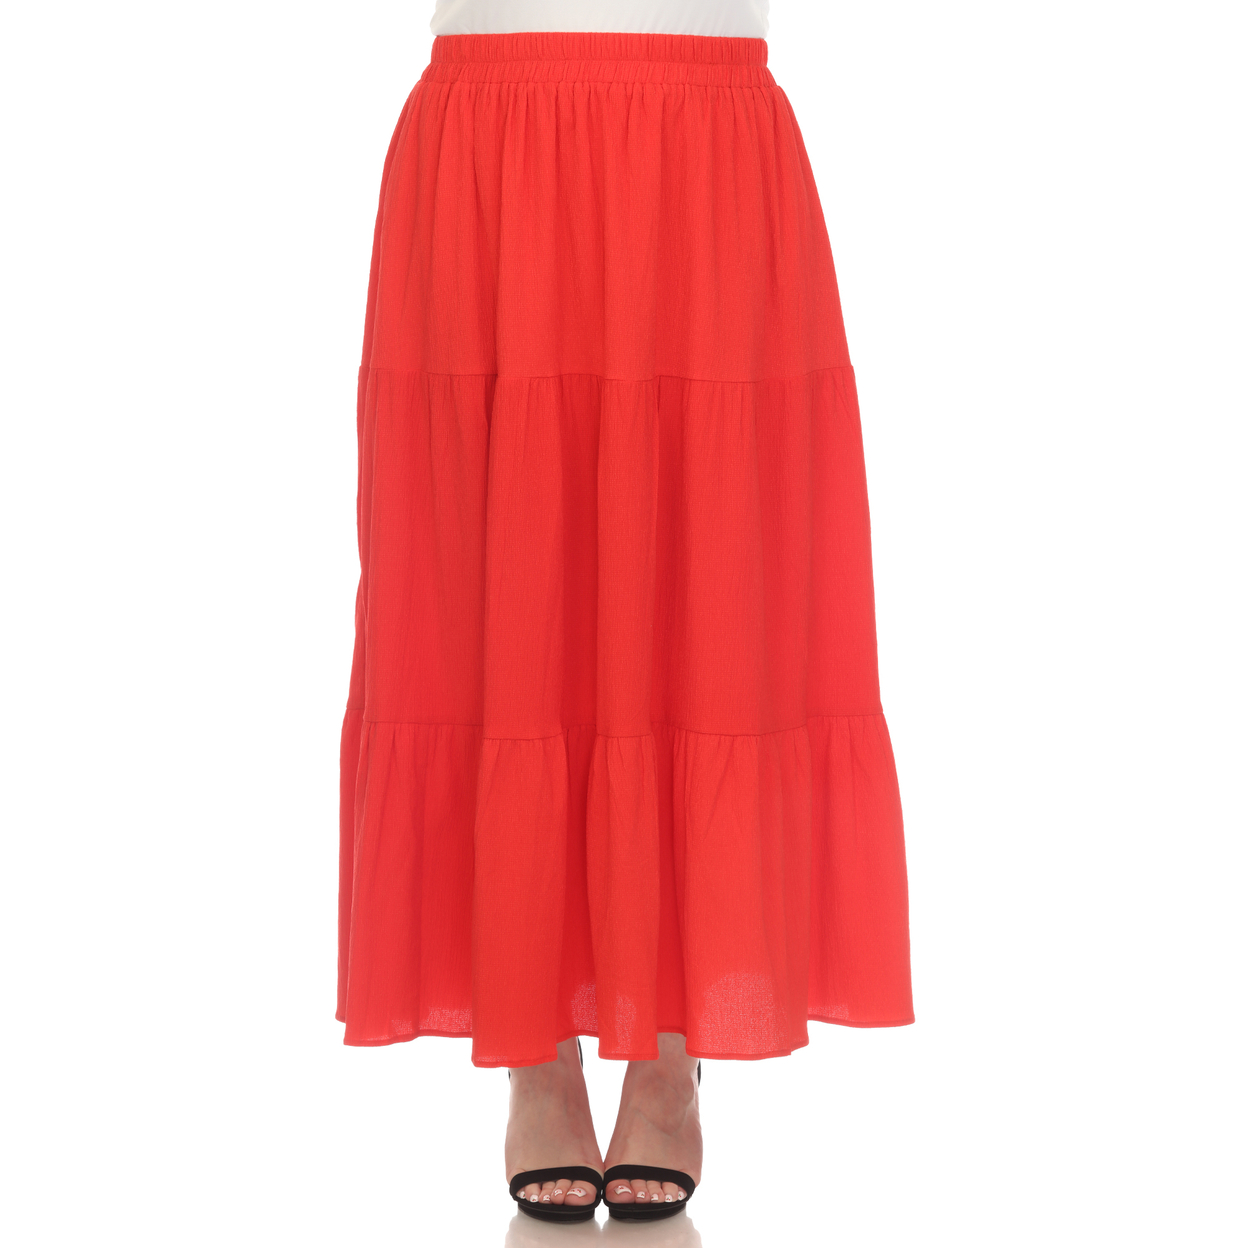 White Mark Women's Pleated Tiered Maxi Skirt - Red, 1x